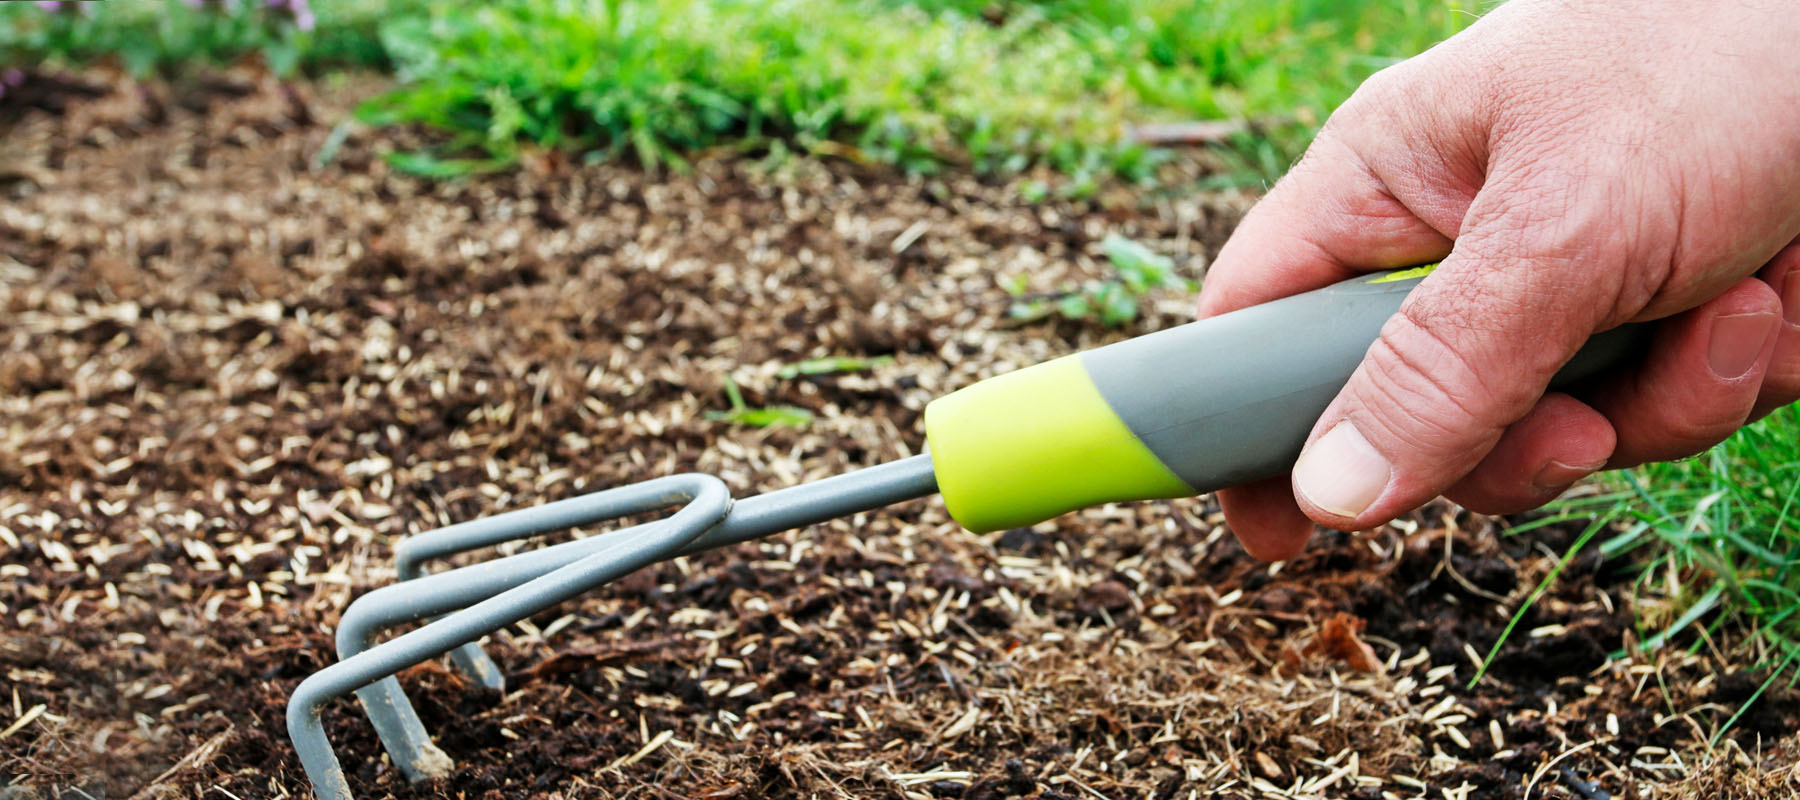 Preparing your lawn for summer